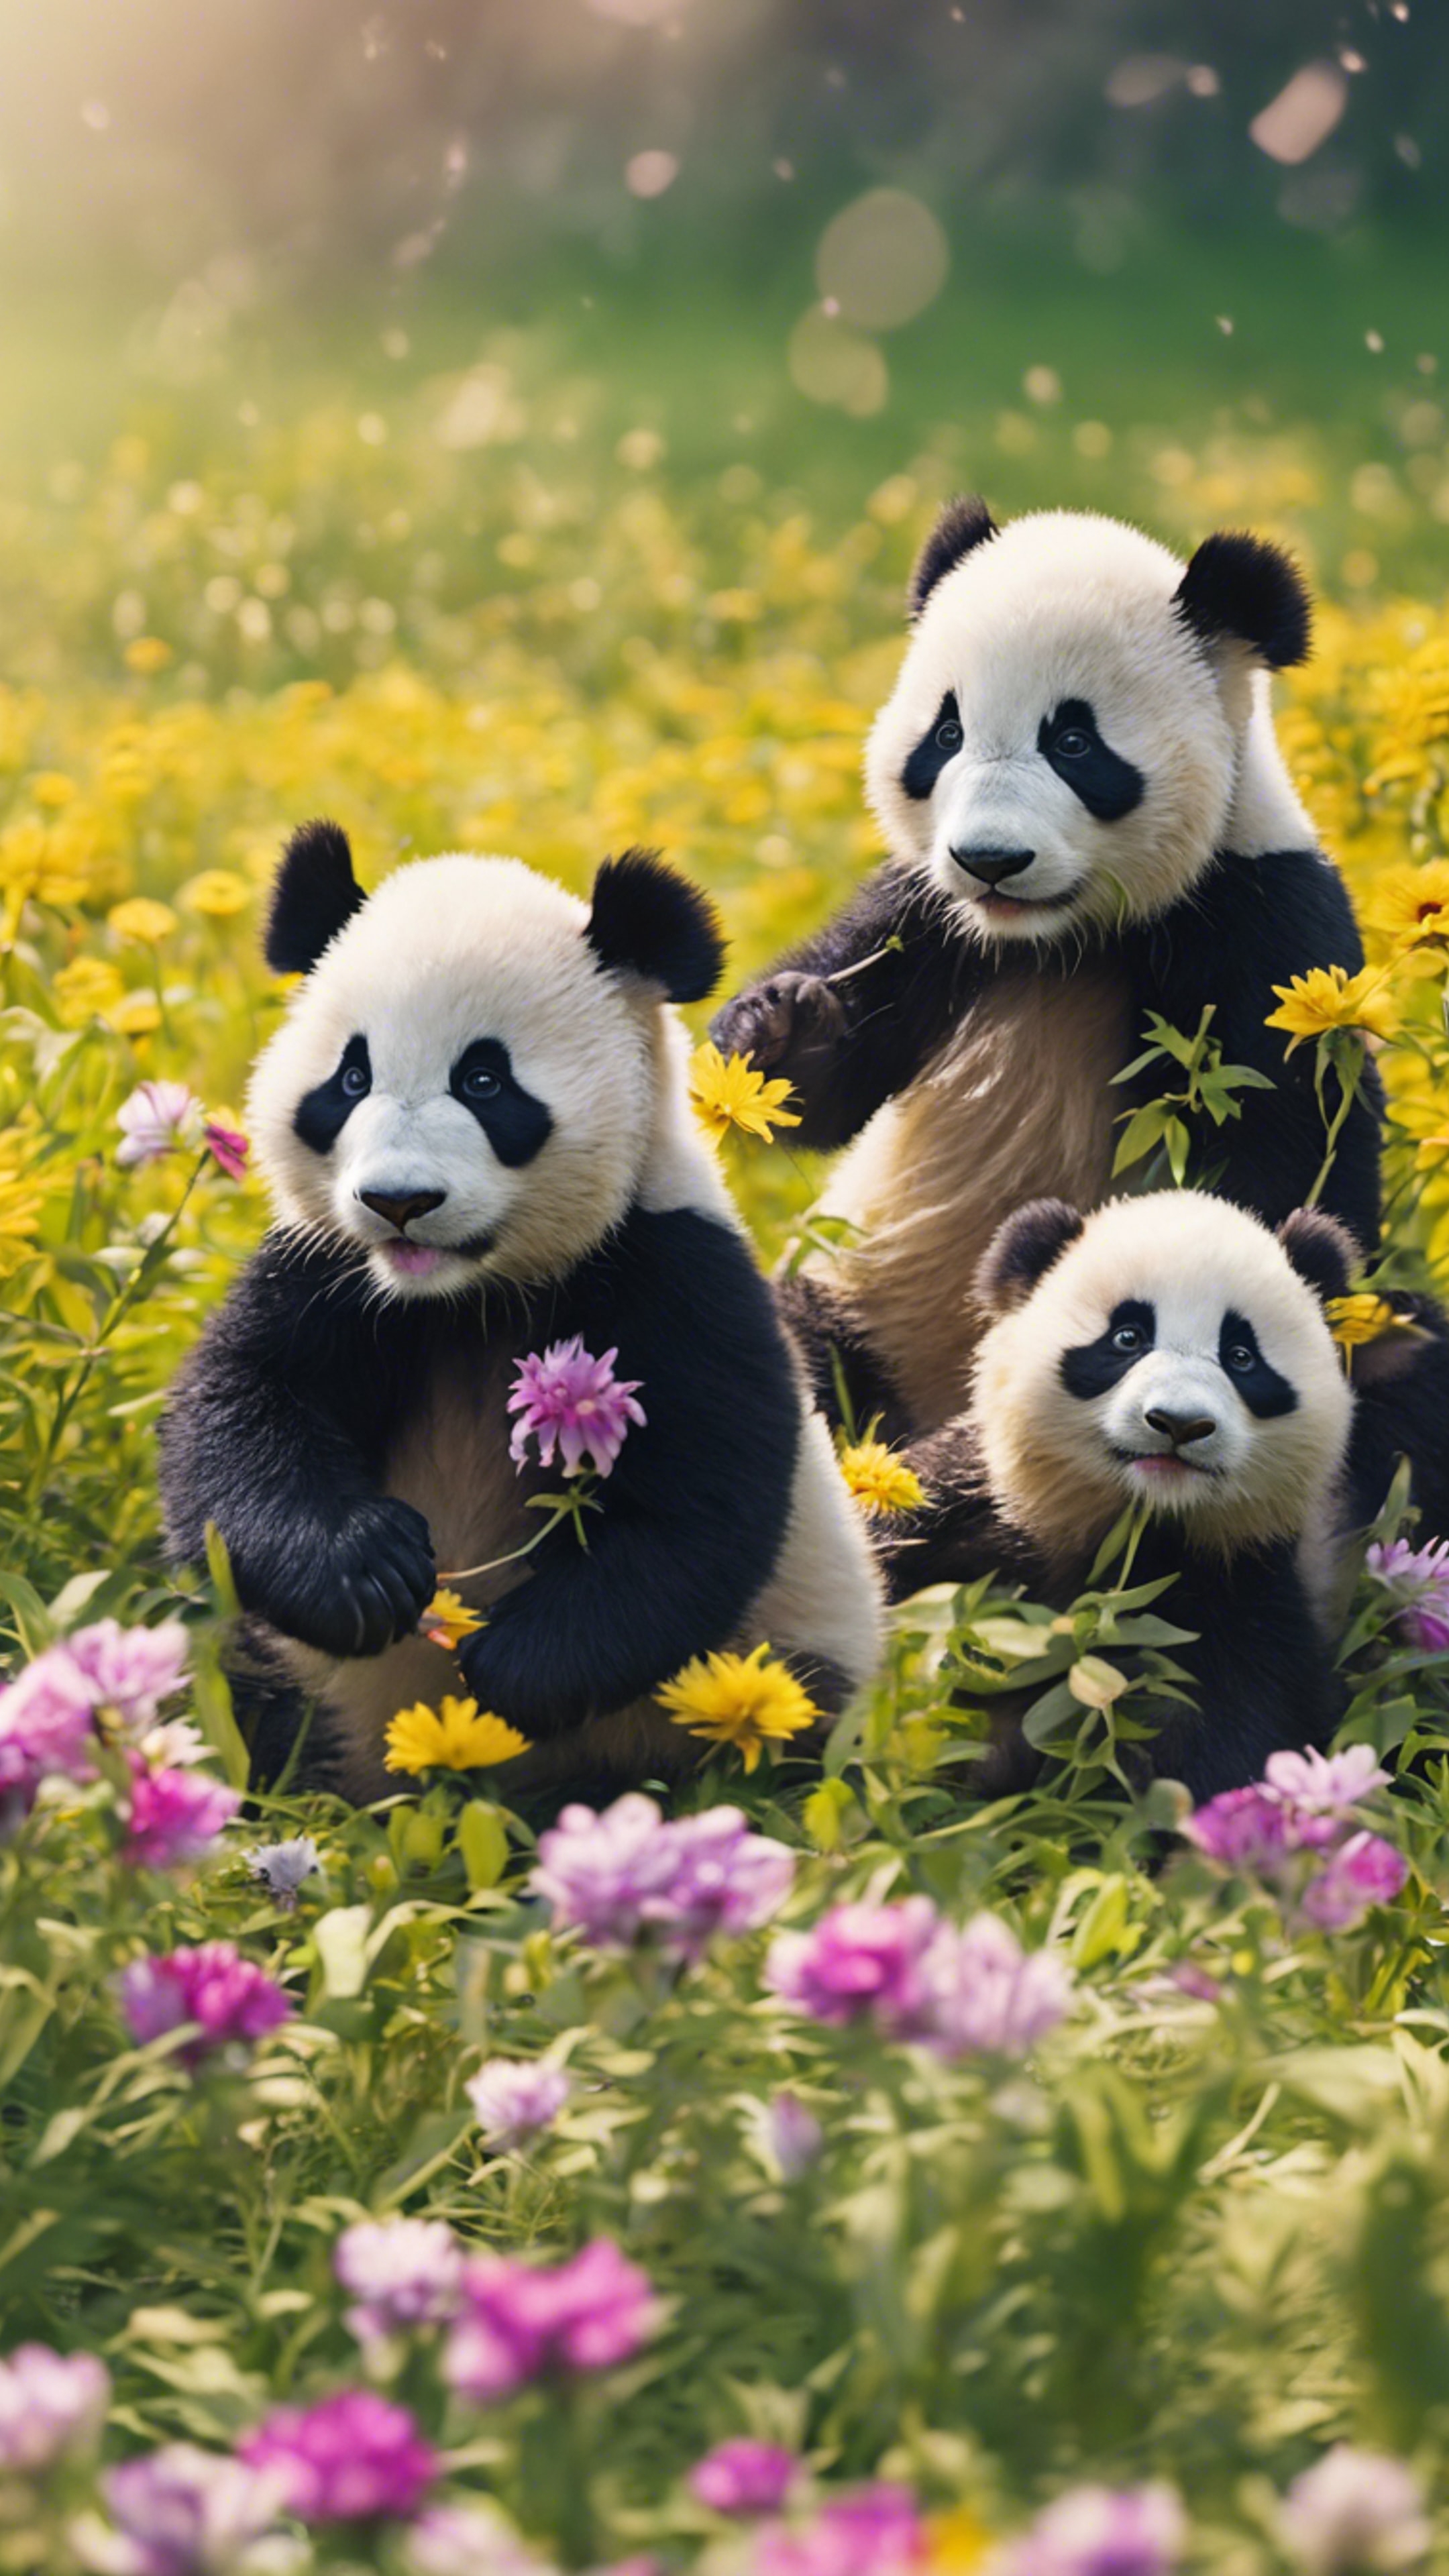 A group of lively panda cubs merrily playing tag in a field full of bright spring flowers. Hình nền[9de4fa100eef4aefa43d]